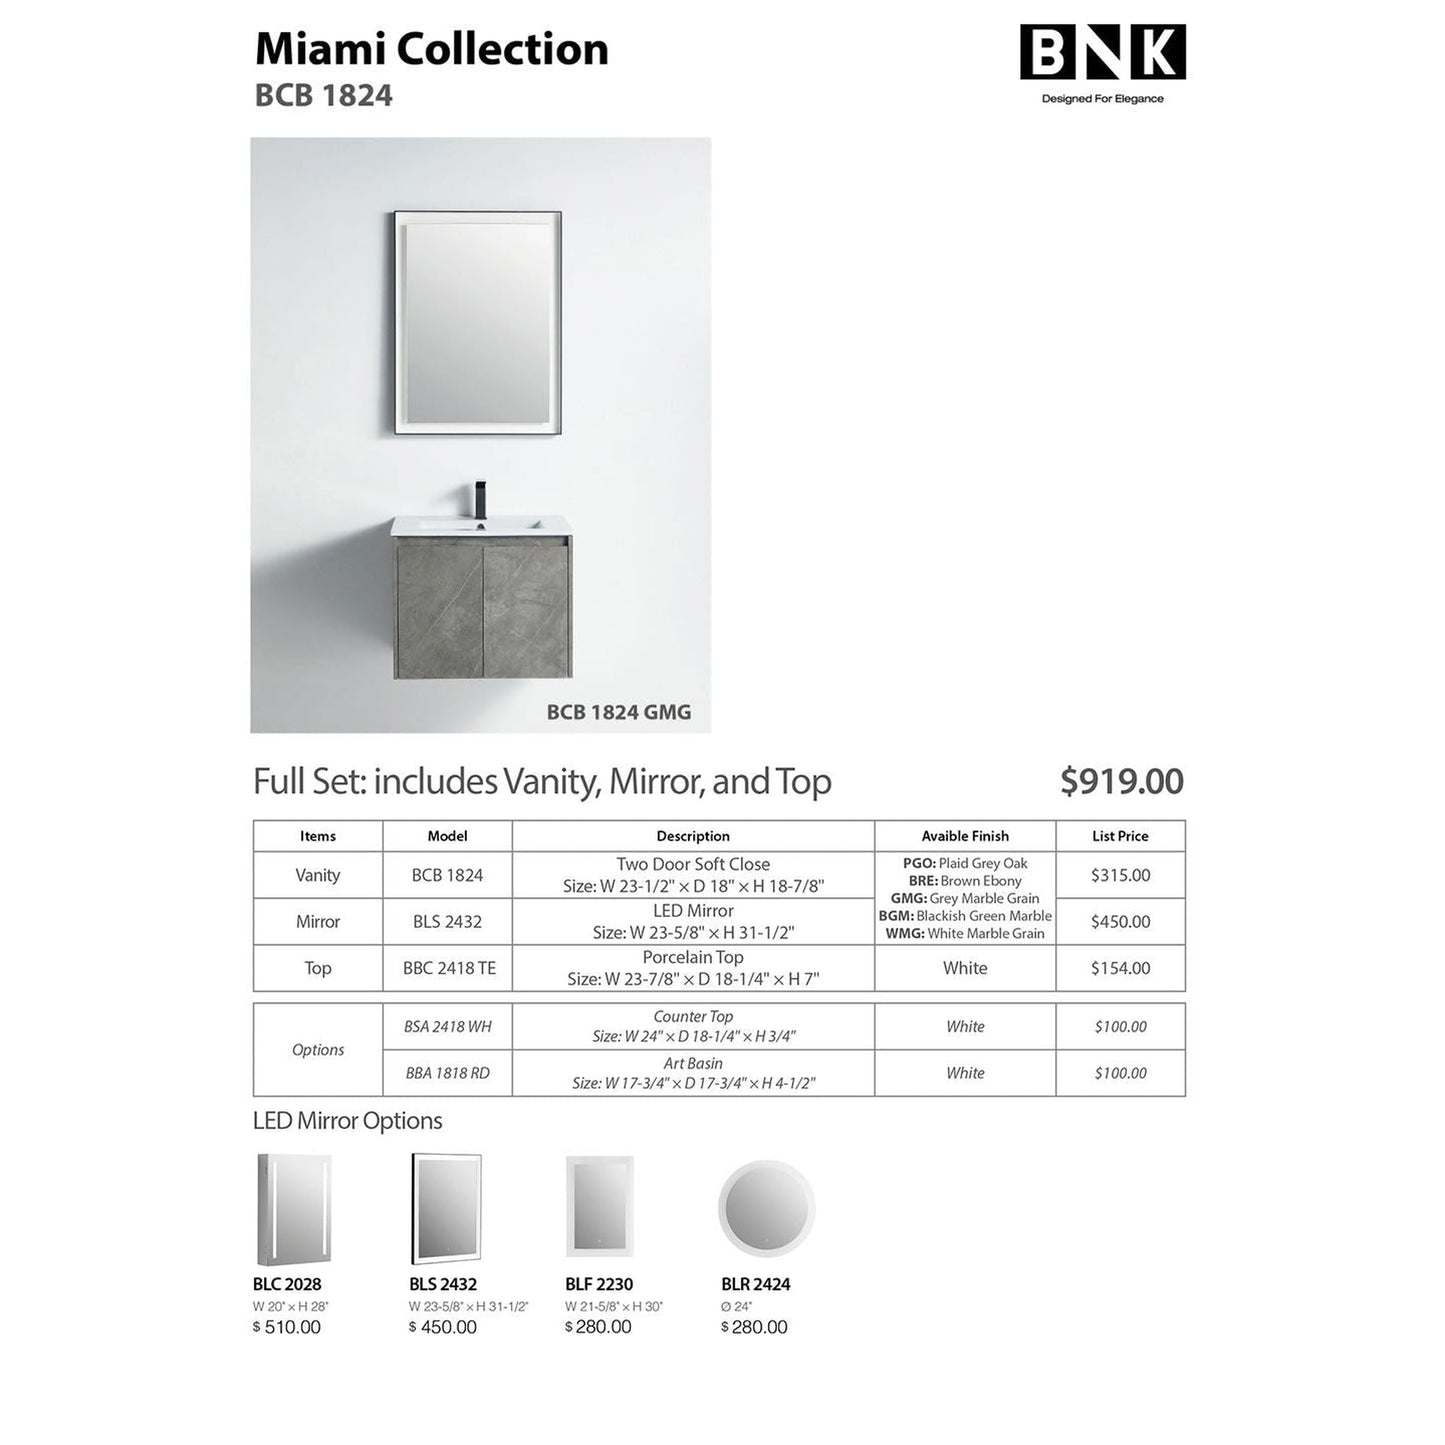 BNK BCB1824GMG Miami Grey Mable Grain Vanity Only Two-Door Soft Close